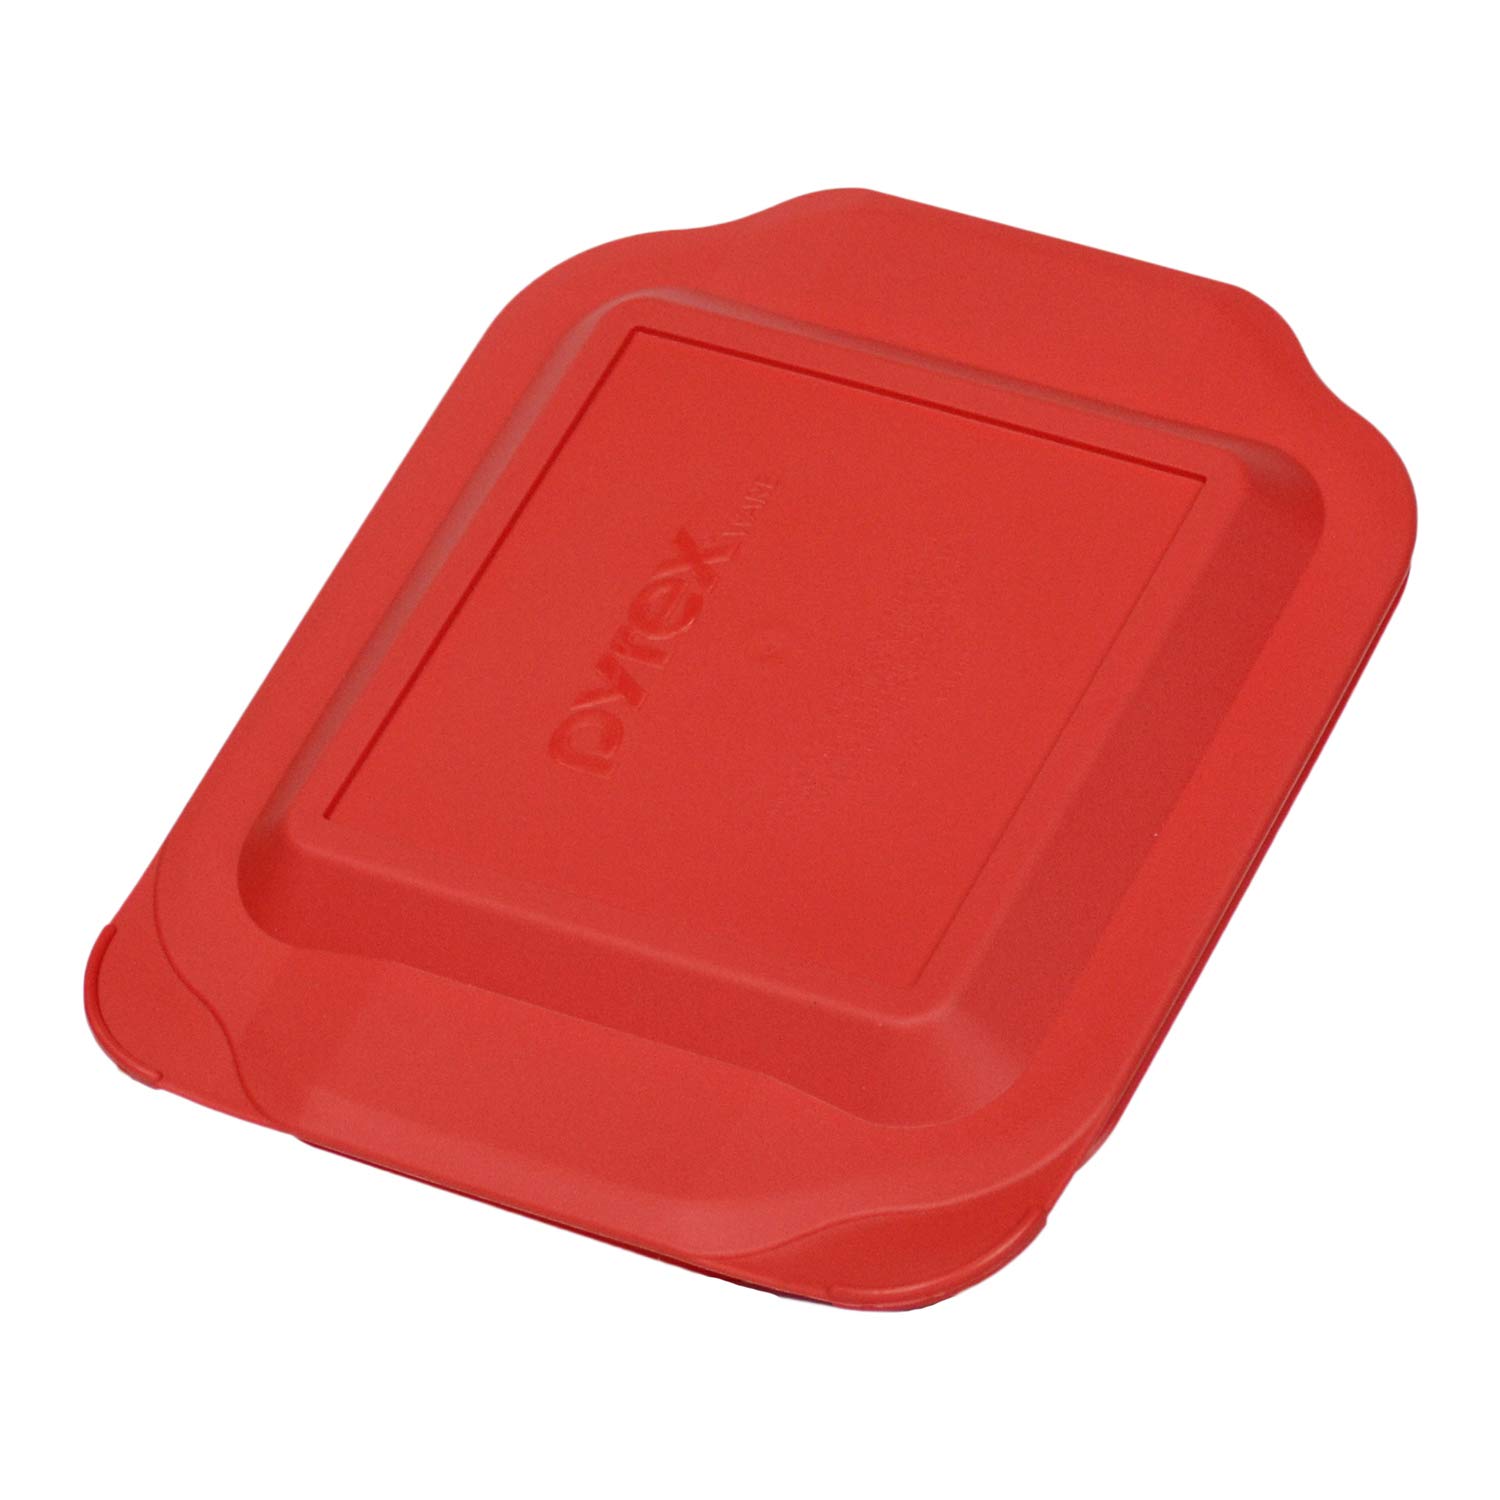 Pyrex 222-PC Red Square Plastic Food Storage Replacement Lid Cover - Made in USA